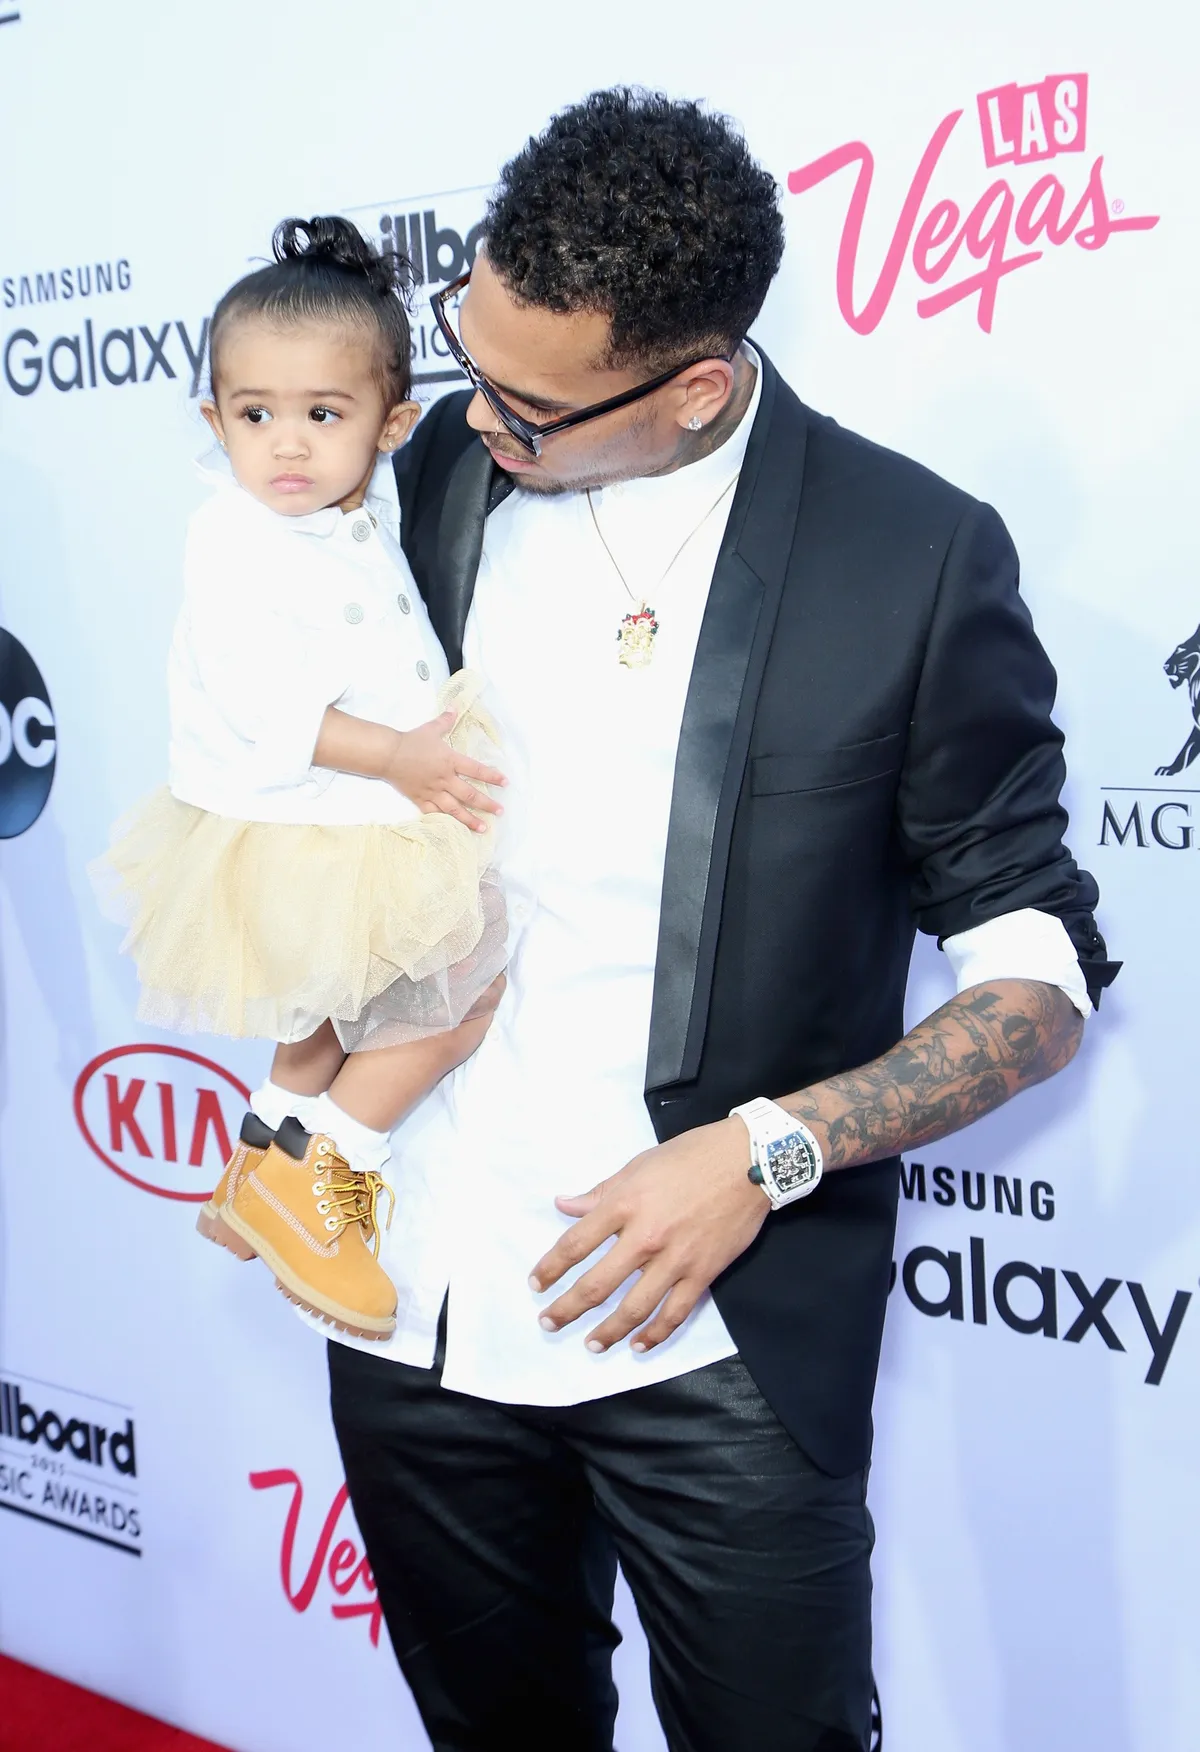 Chris Brown and his daughter Royalty at the 2015 Billboard Music Awards in Las Vegas, Nevada. | Photo: Getty Images